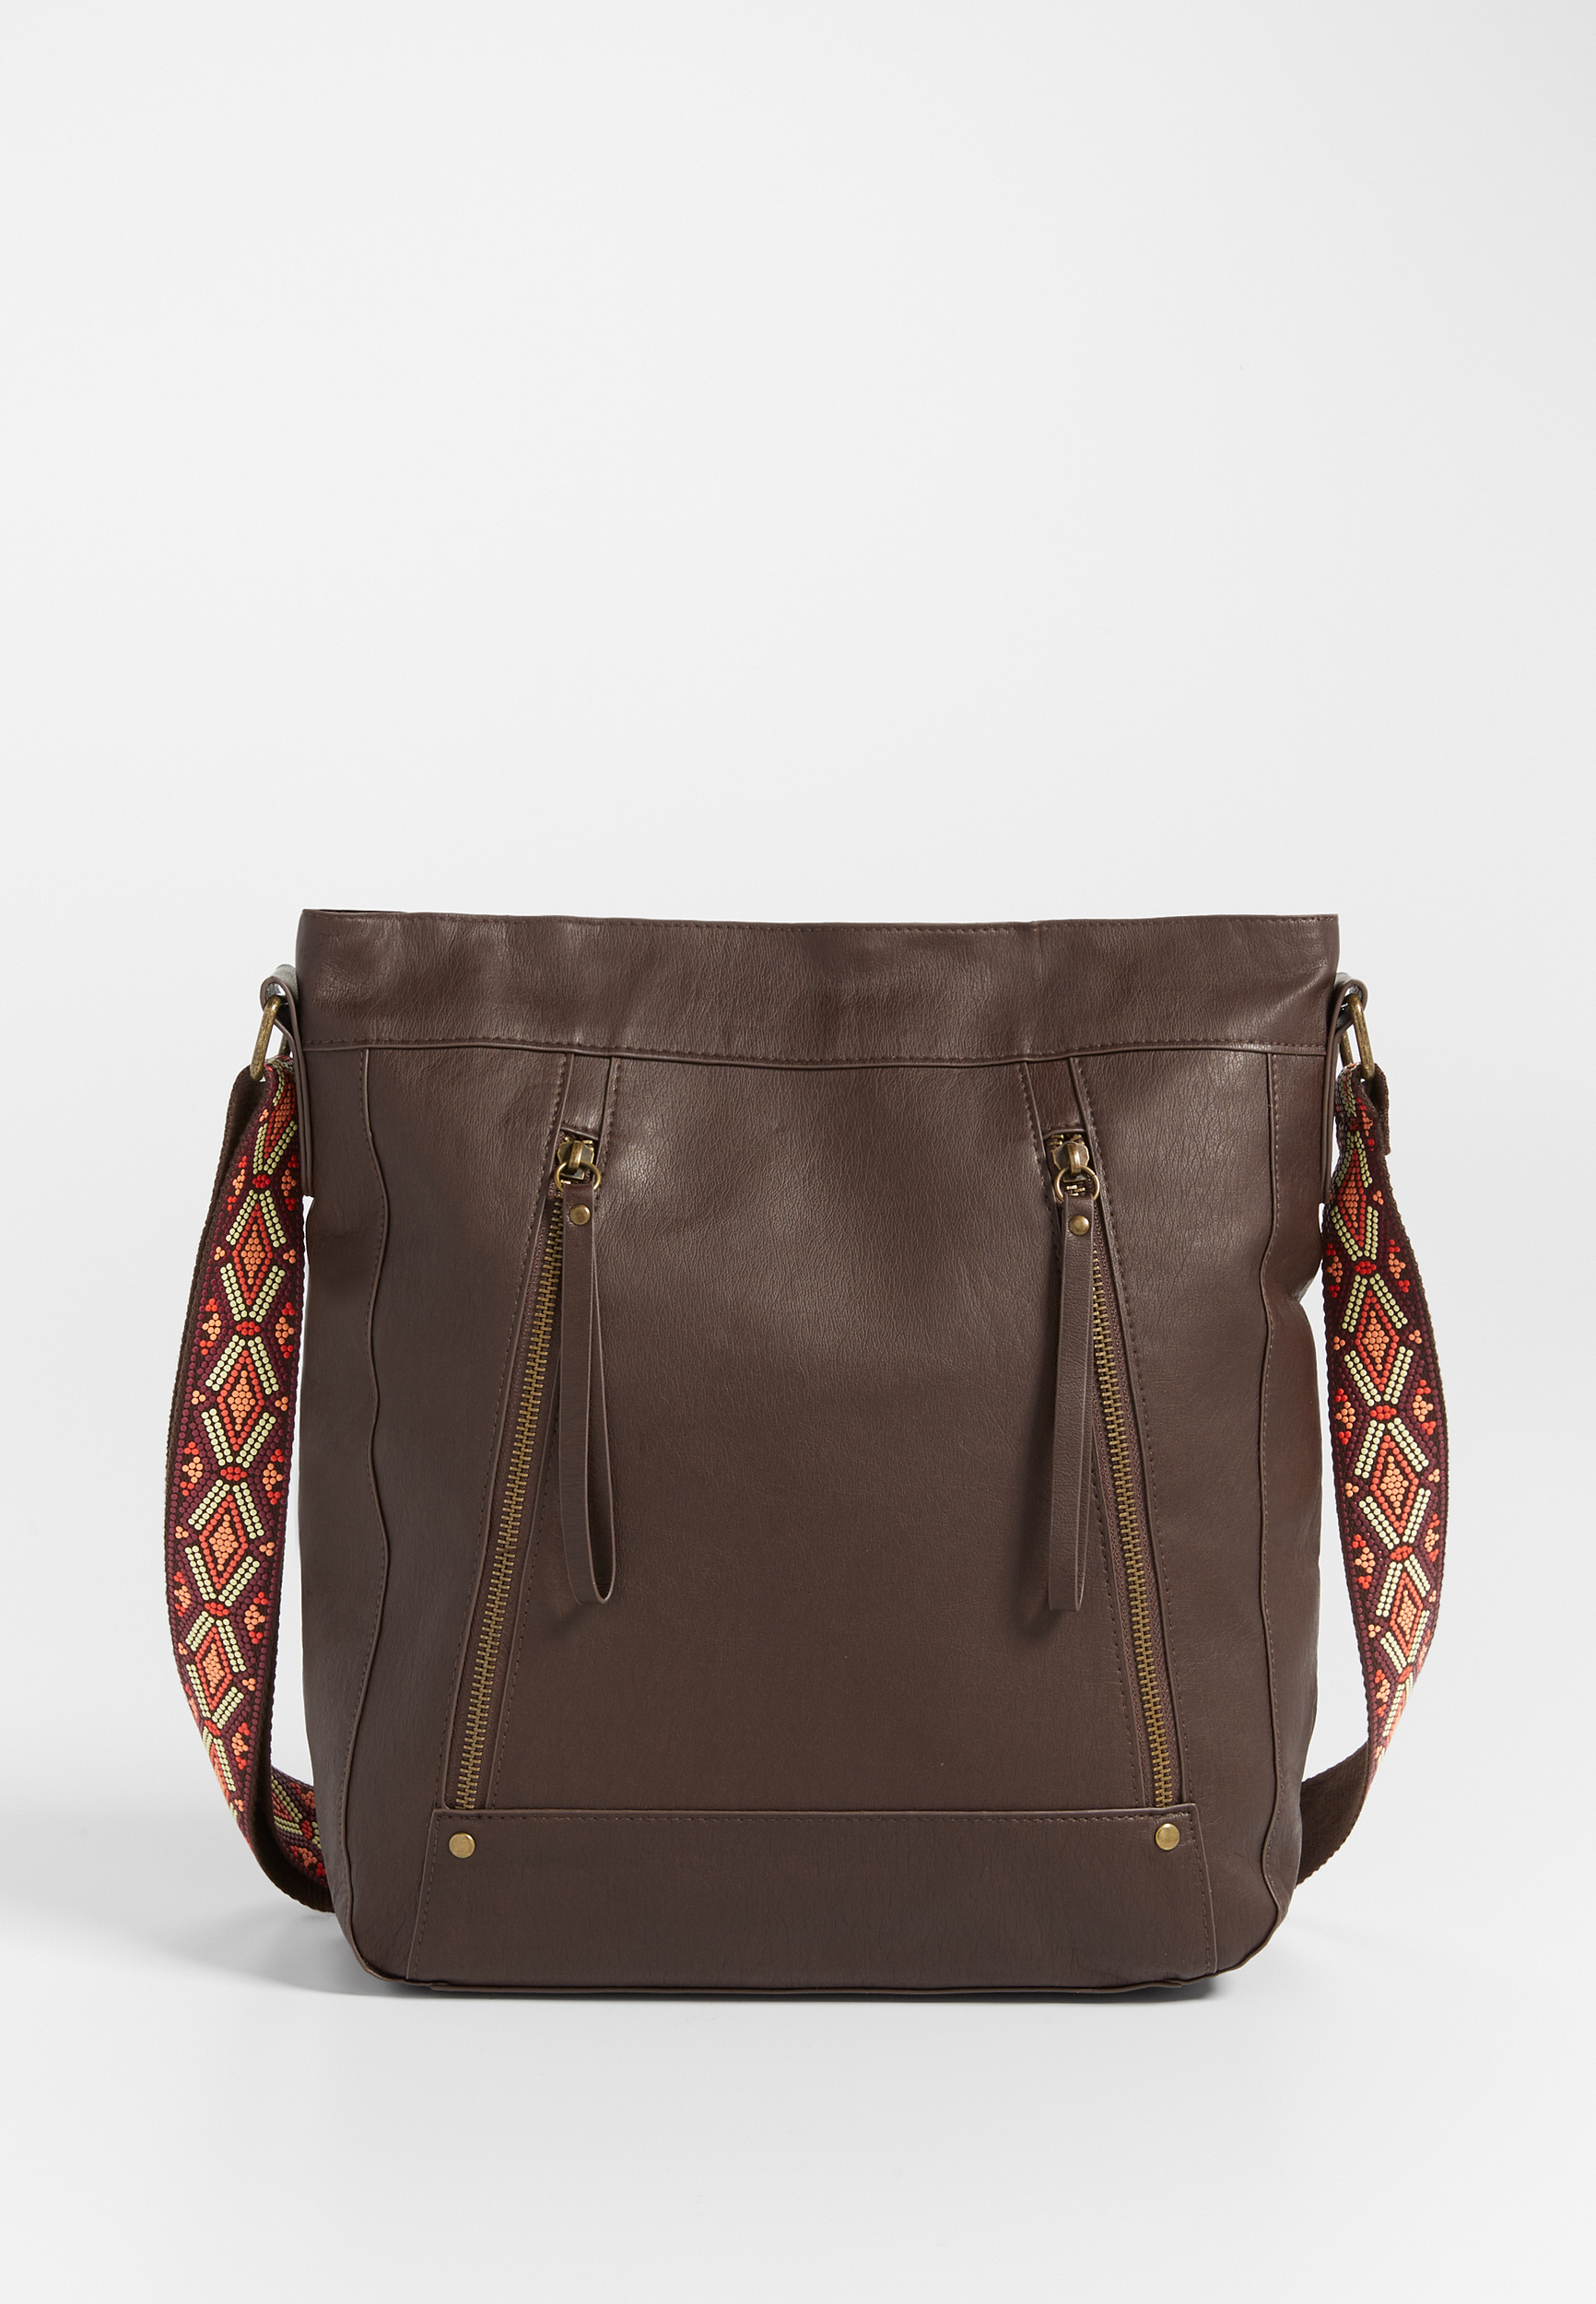 crossbody bag with guitar strap in brown | maurices